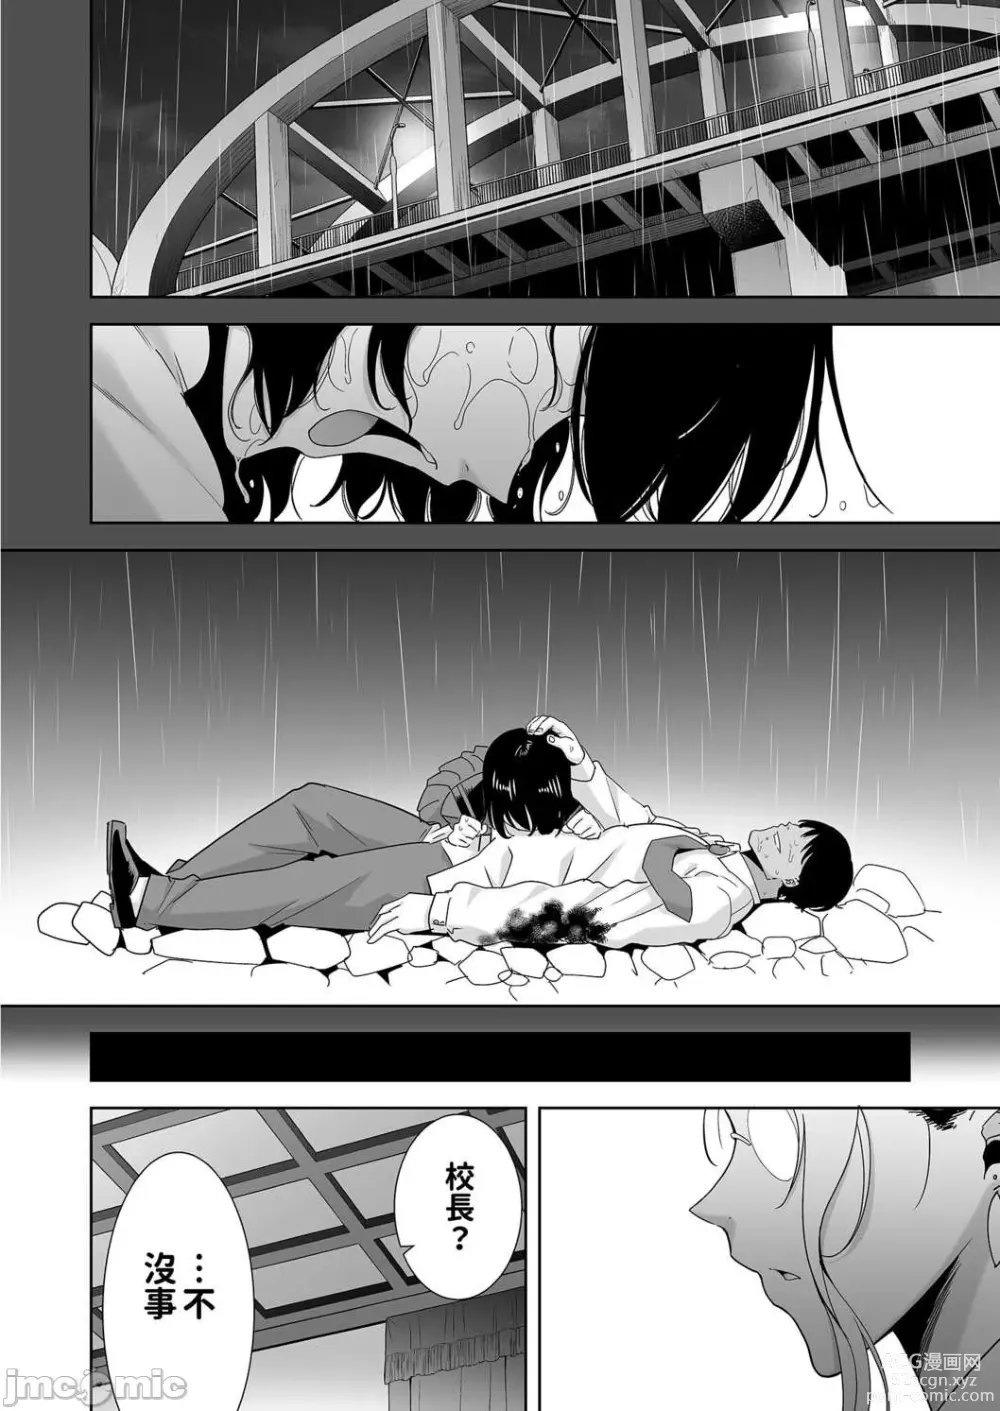 Page 52 of doujinshi 聖華女学院高等部公認竿おじさん 5